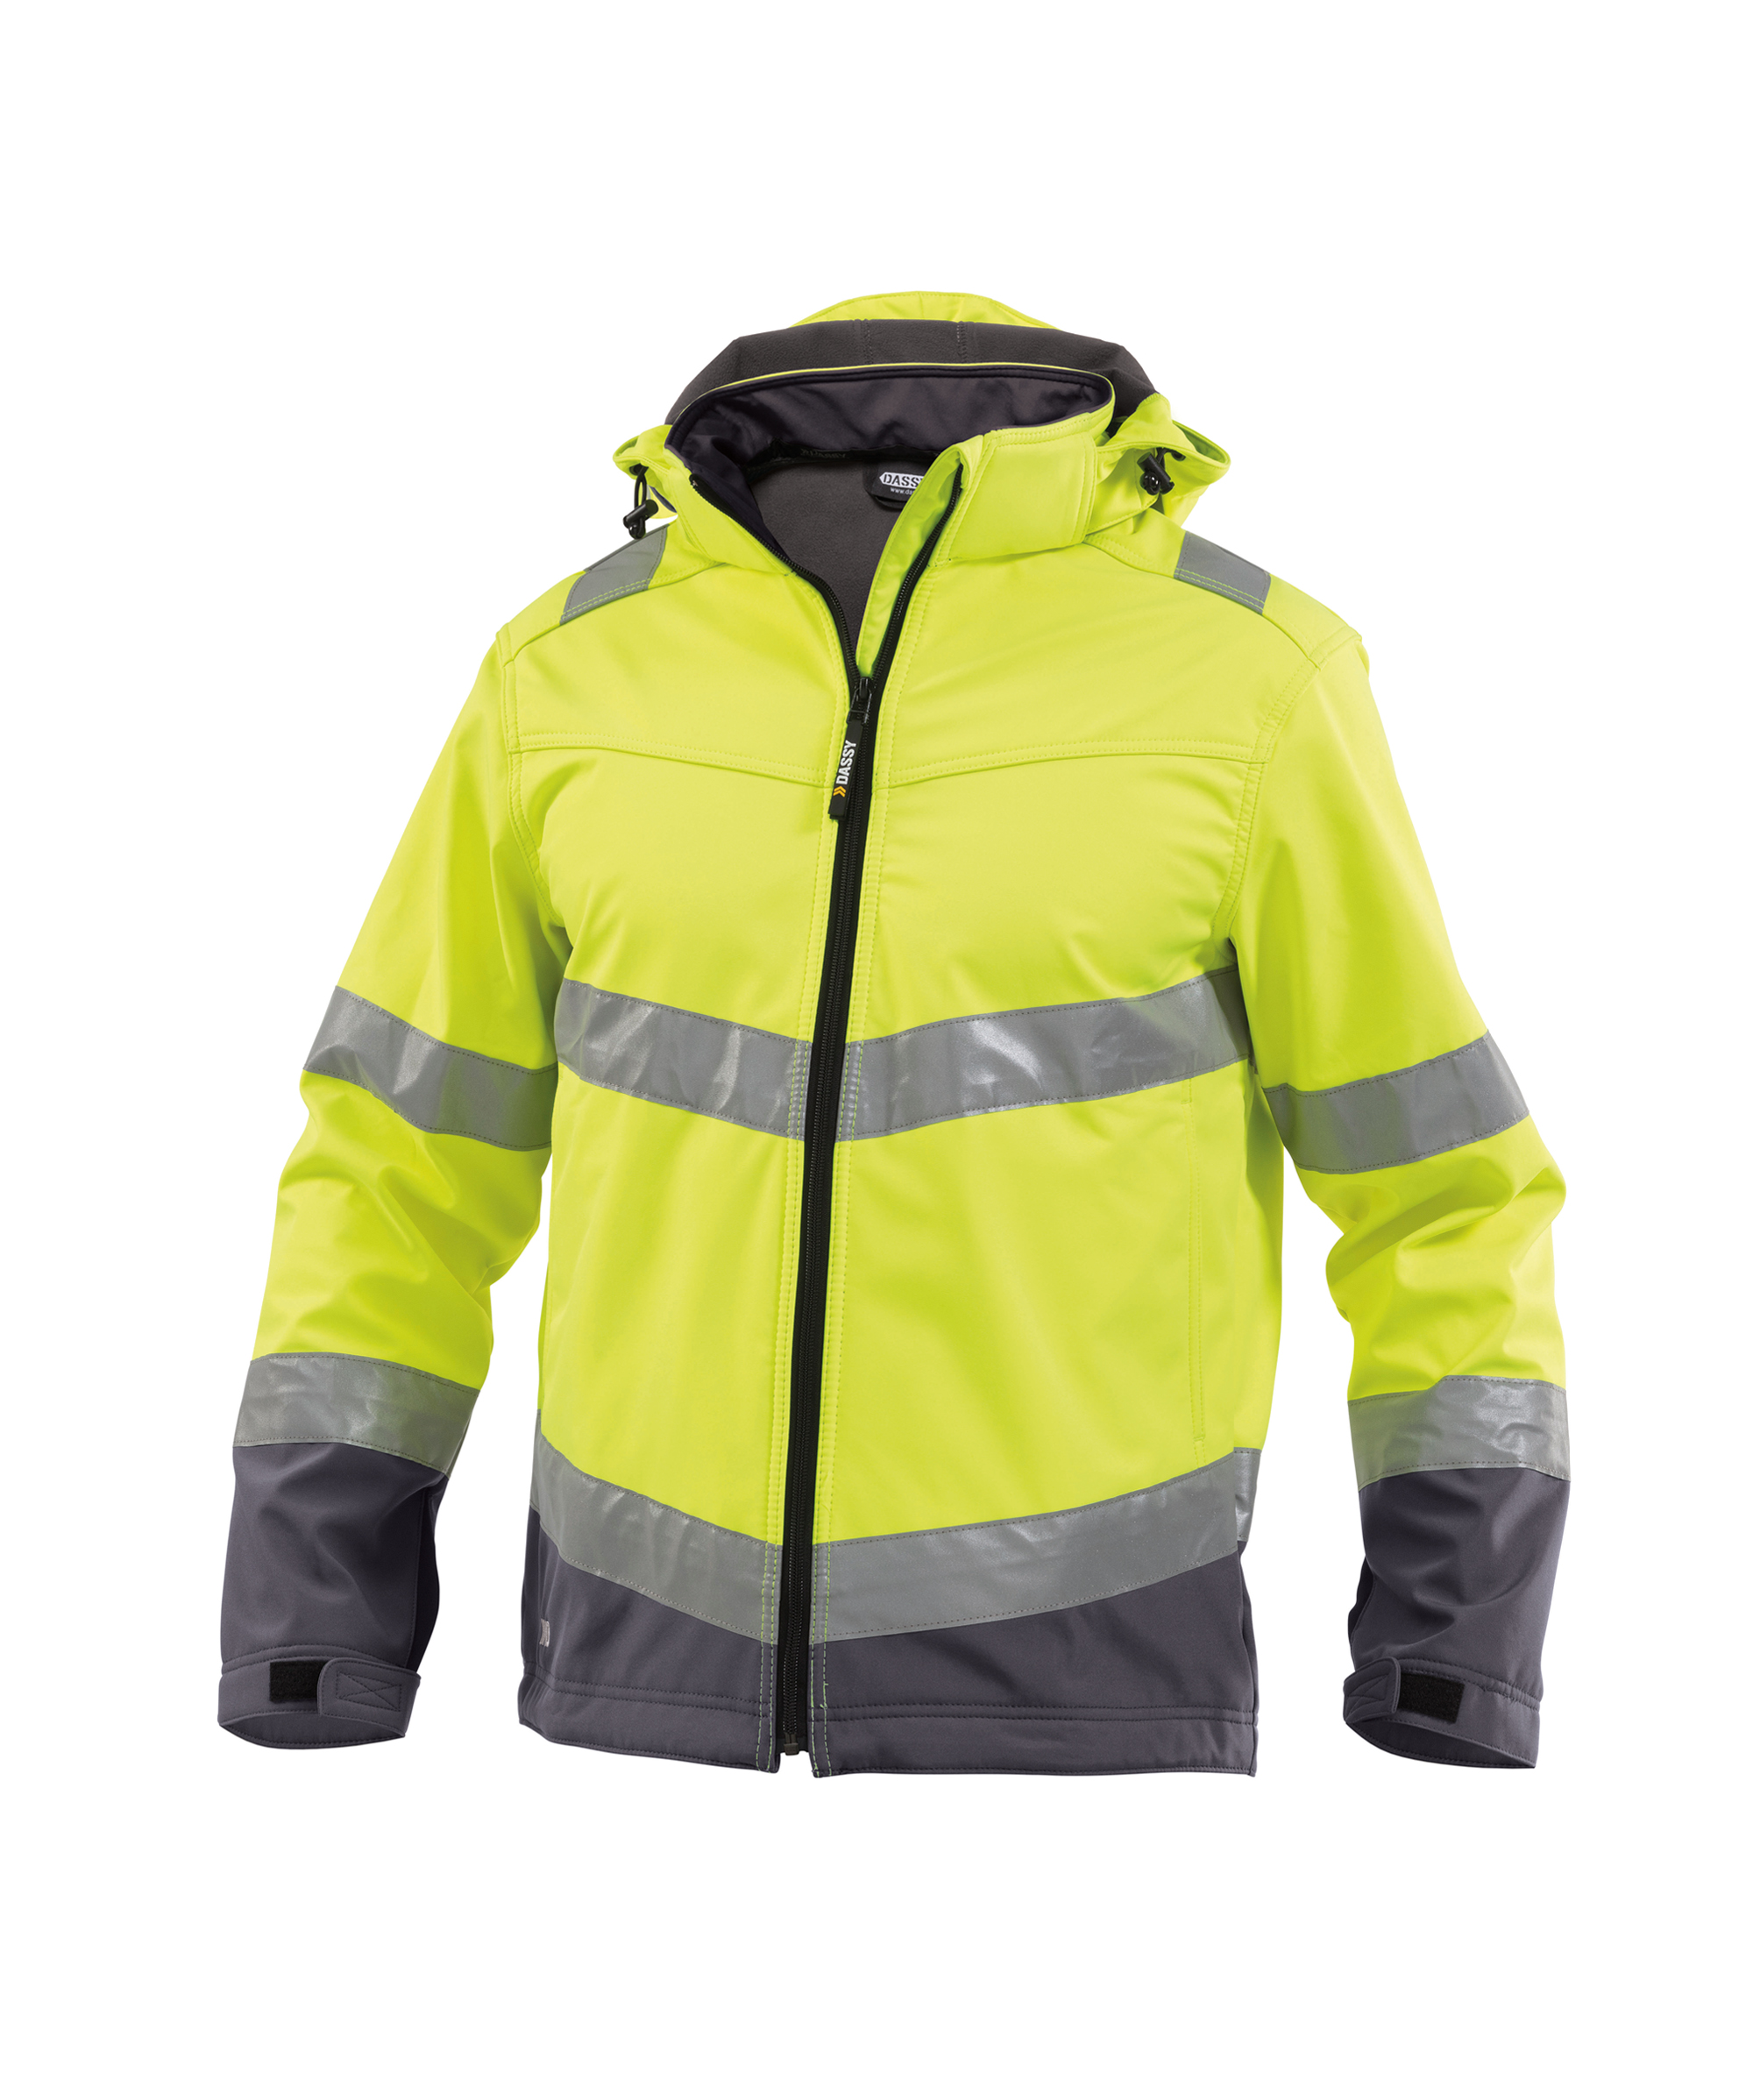 malaga_high-visibility-softshell-work-jacket_fluo-yellow-cement-grey_front.jpg